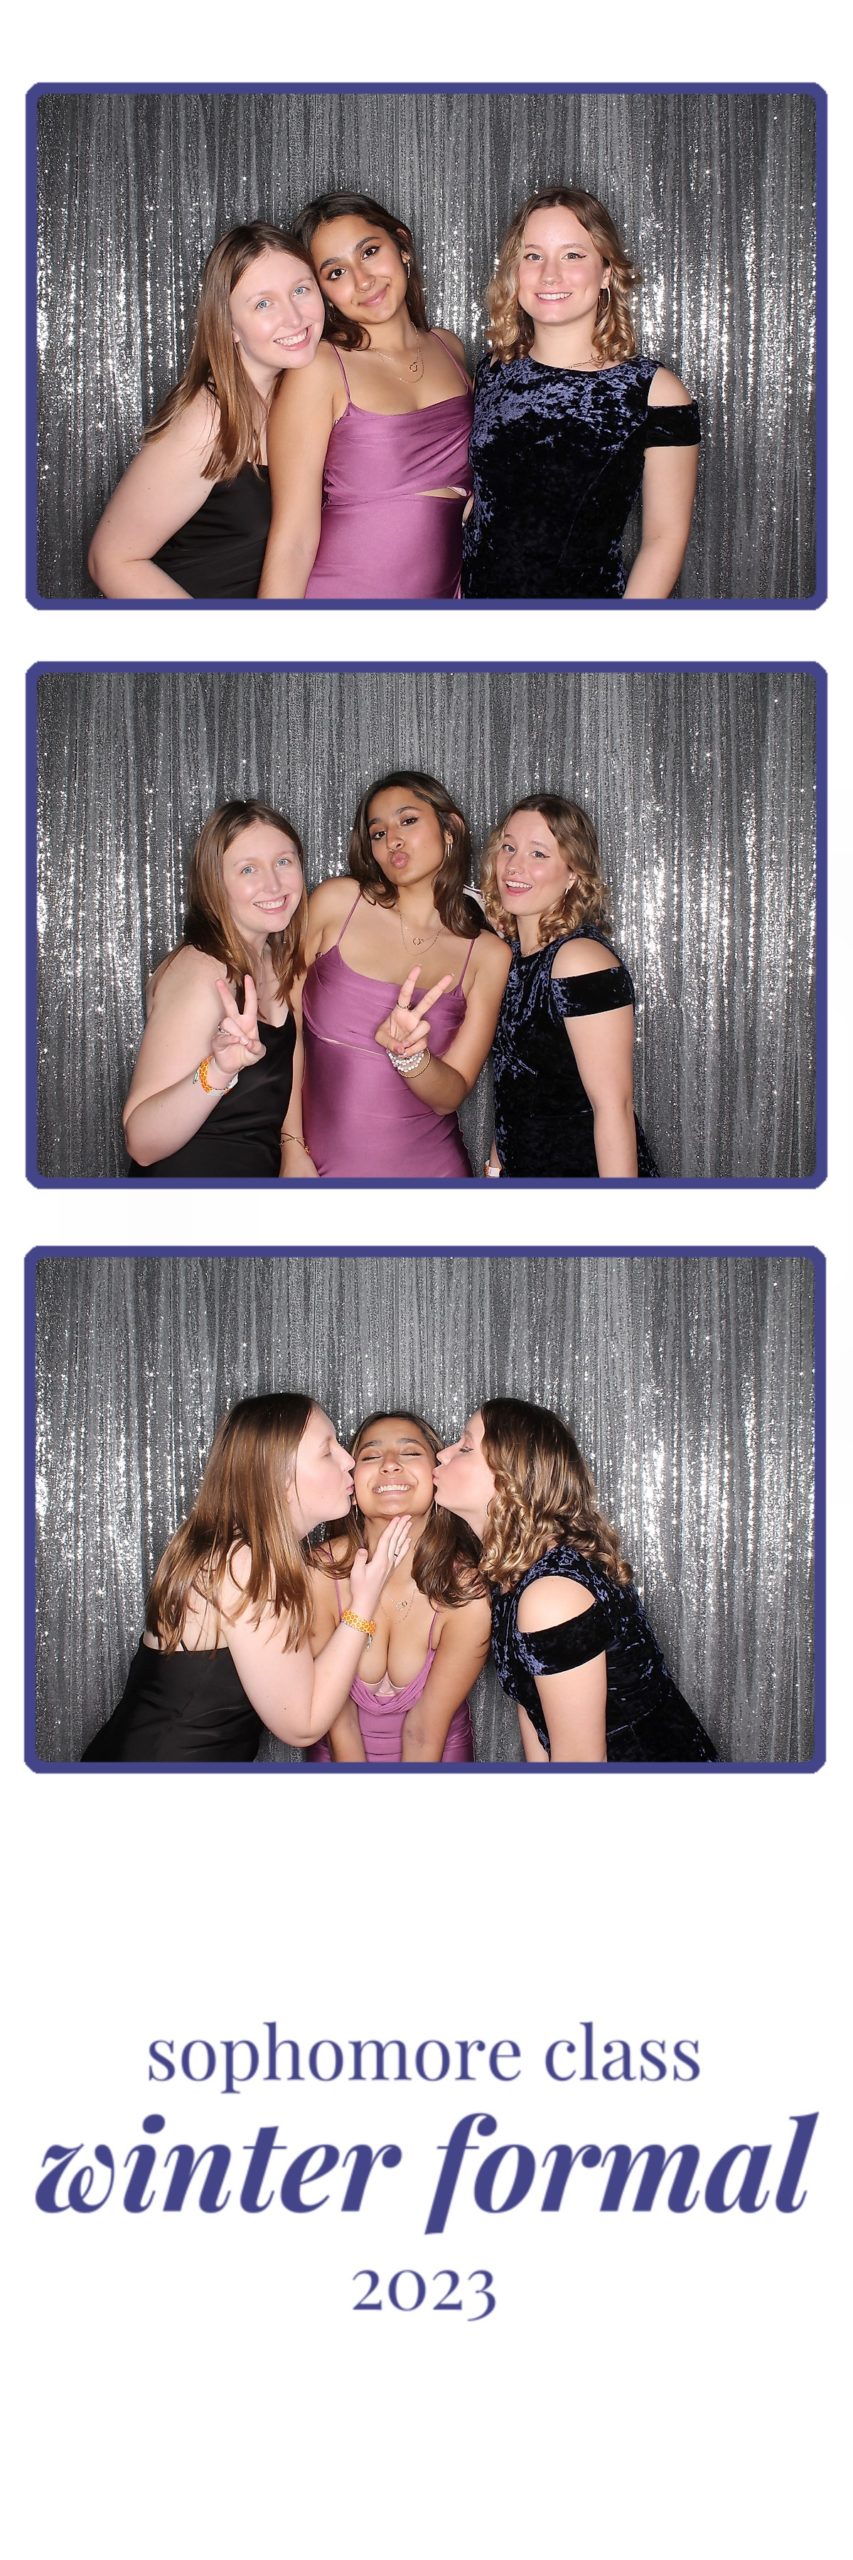 School Event Photo Booth